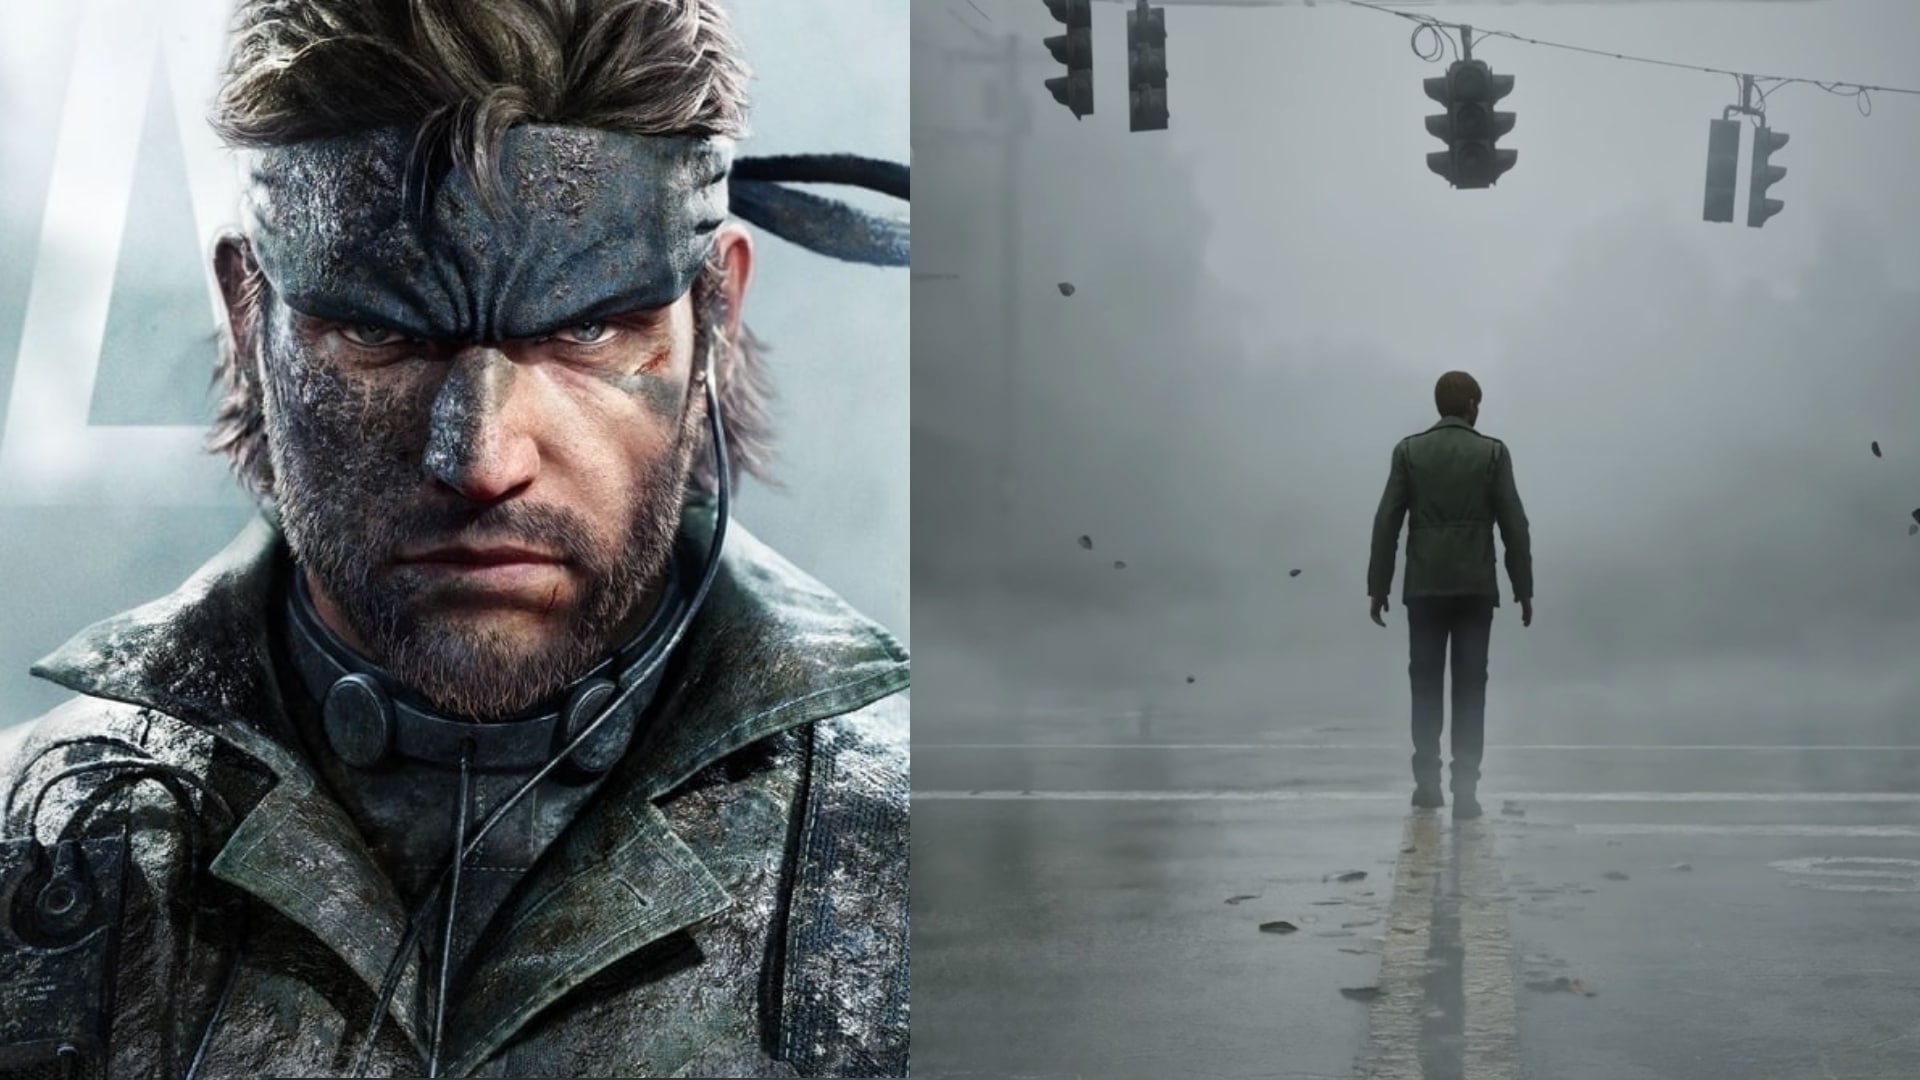 Silent Hill 2 Remake and Metal Gear Solid Delta Snake Eater Release Date